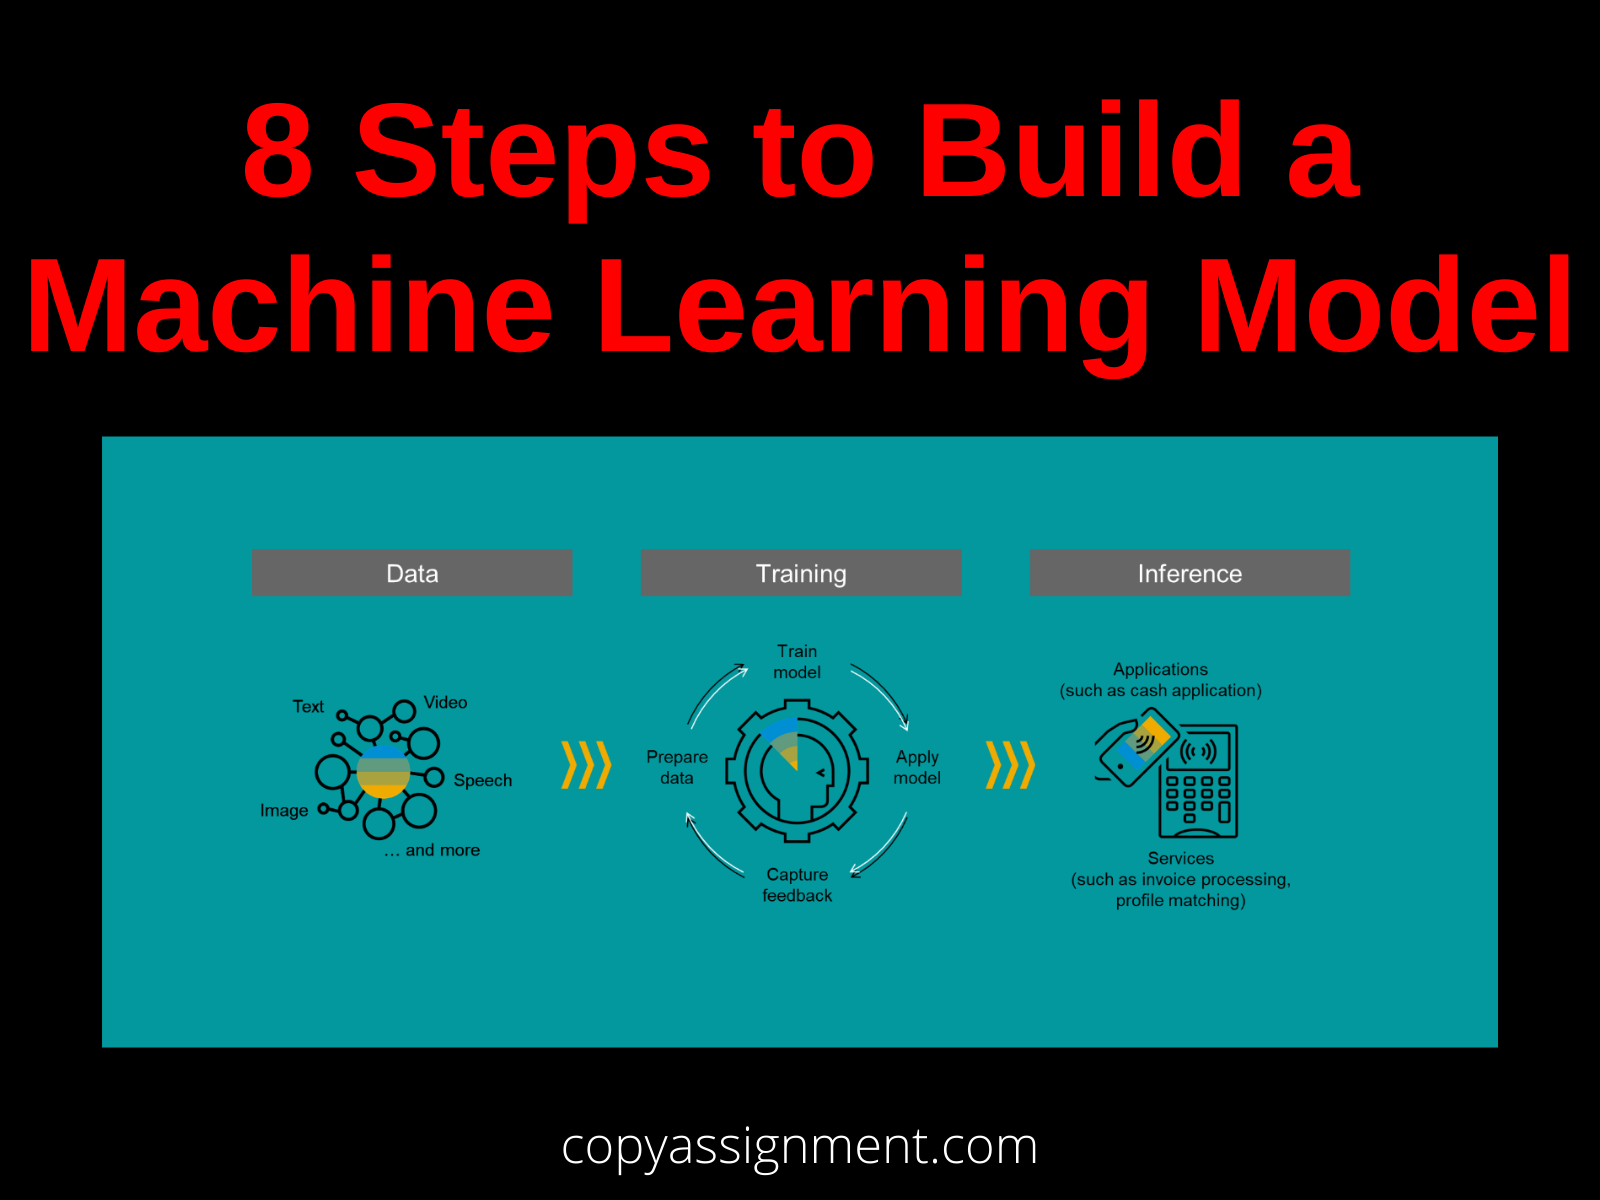 8 Steps to Build a Machine Learning Model